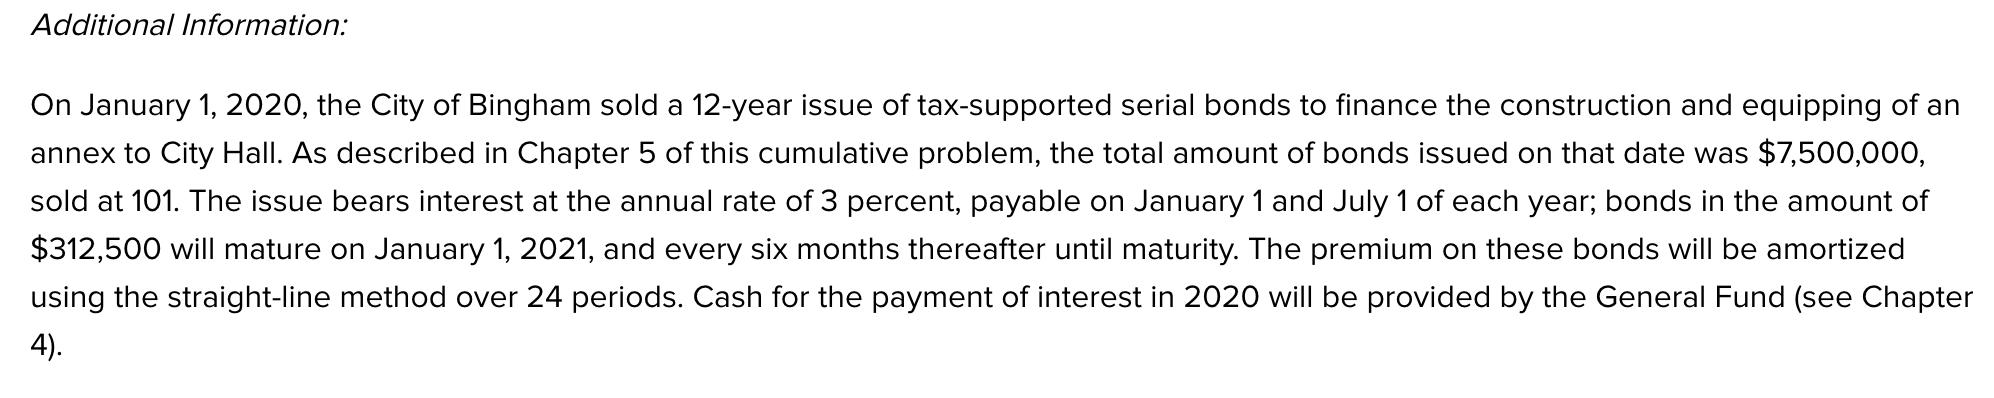 Additional Information: On January 1, 2020, the City of Bingham sold a 12-year issue of tax-supported serial bonds to finance